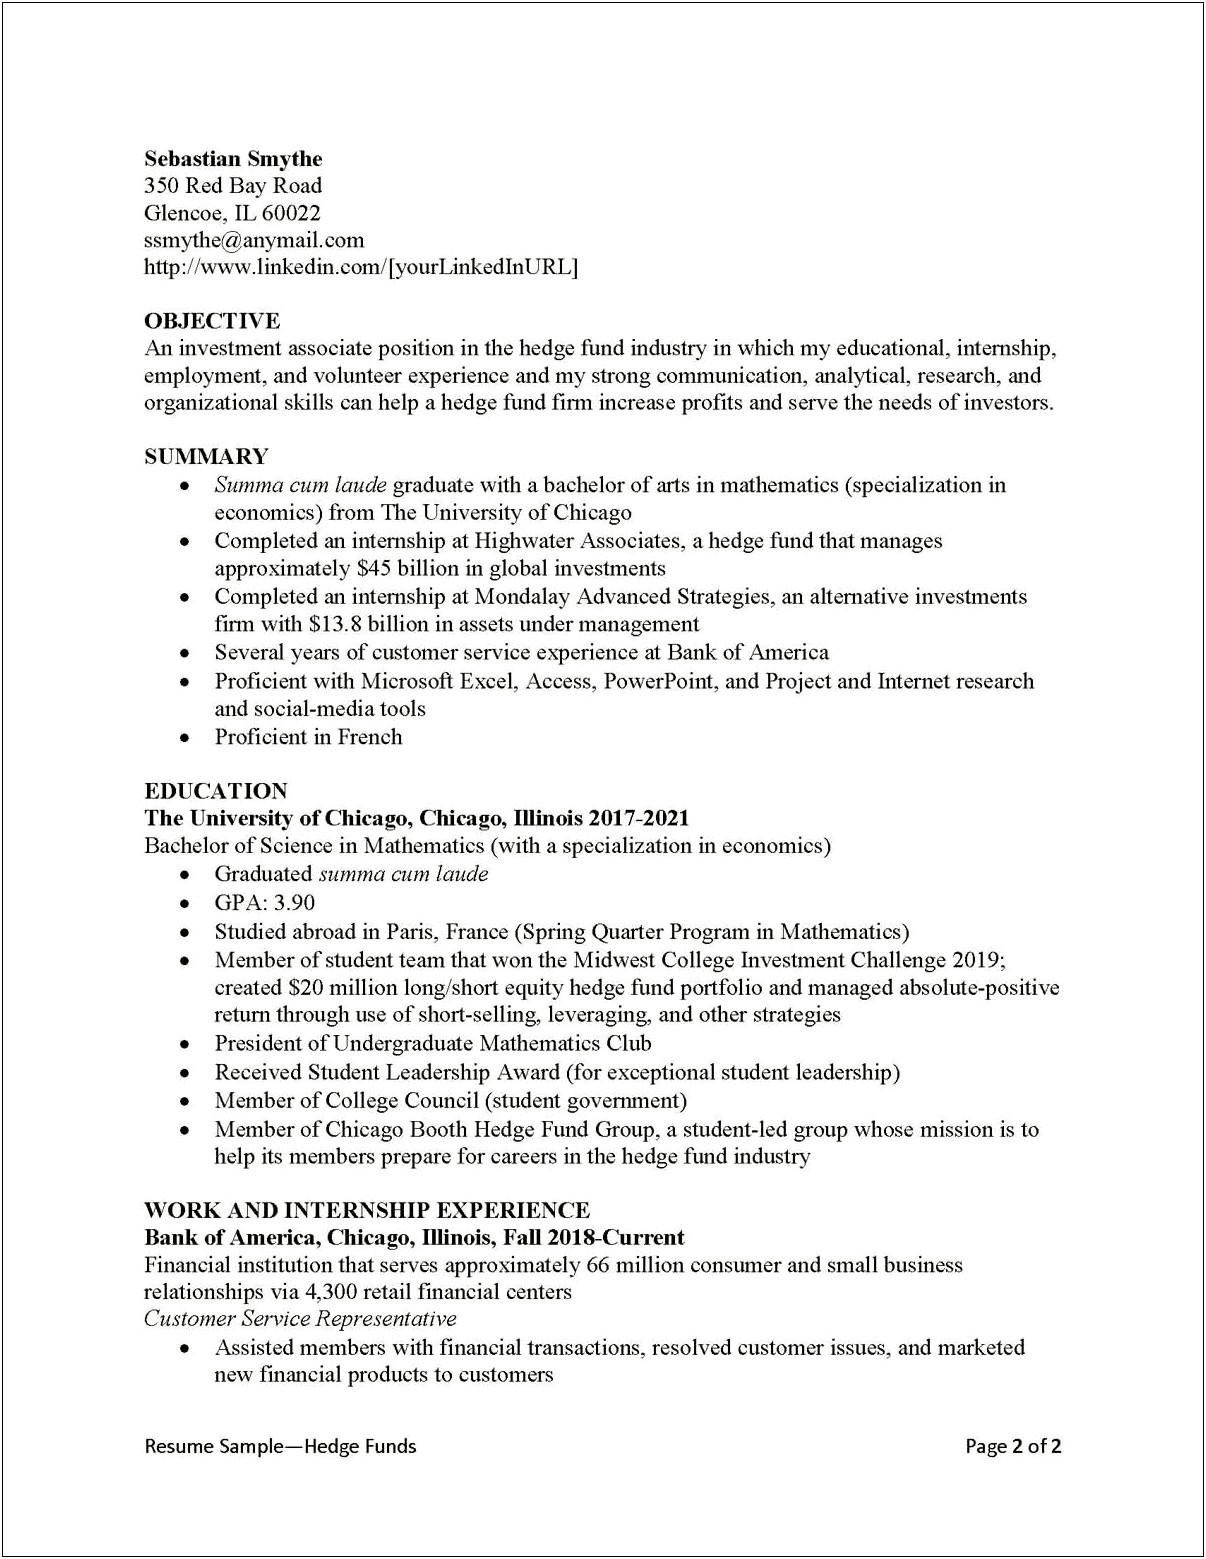 Resume Example For Long Term Employment